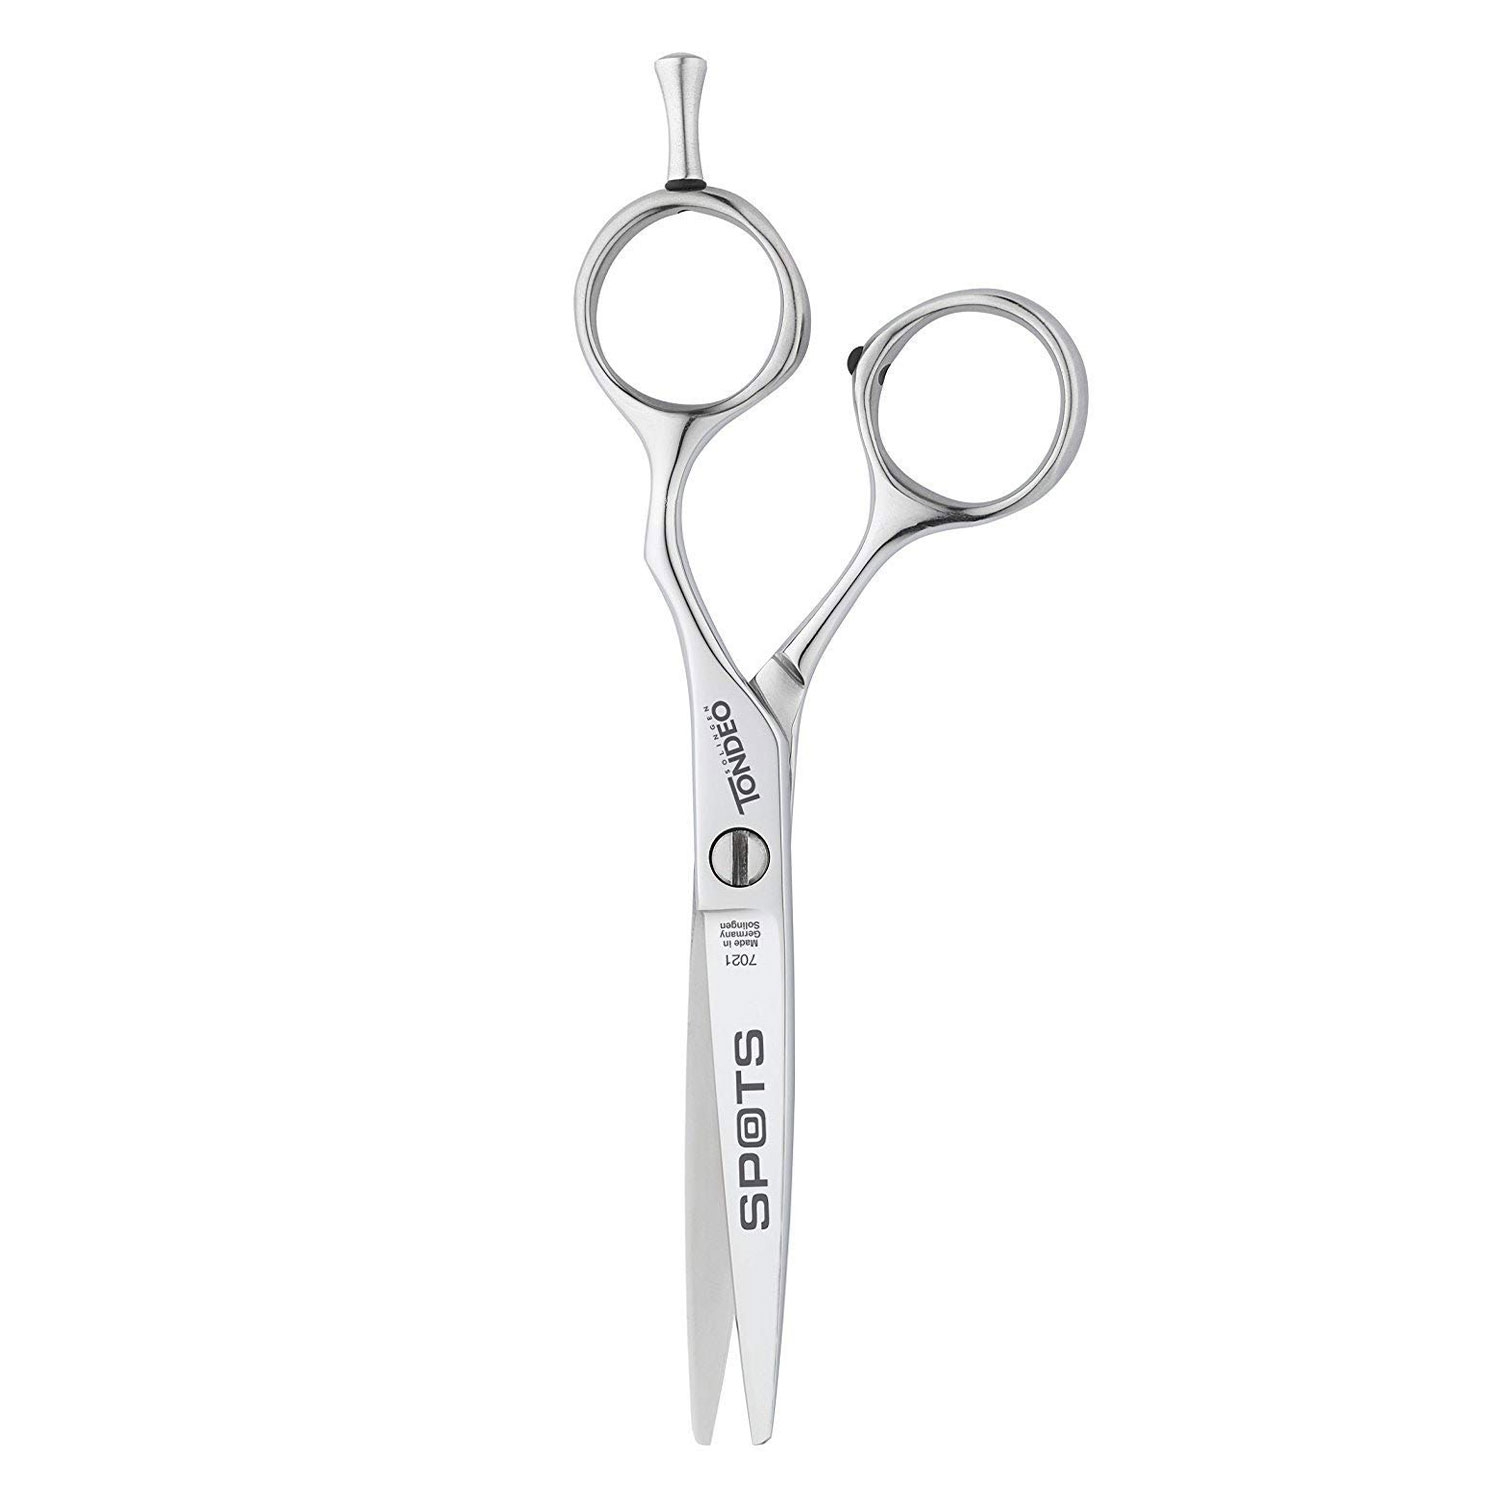 Product image from Tondeo Scissors - Spots Offset Scissors 5.0"